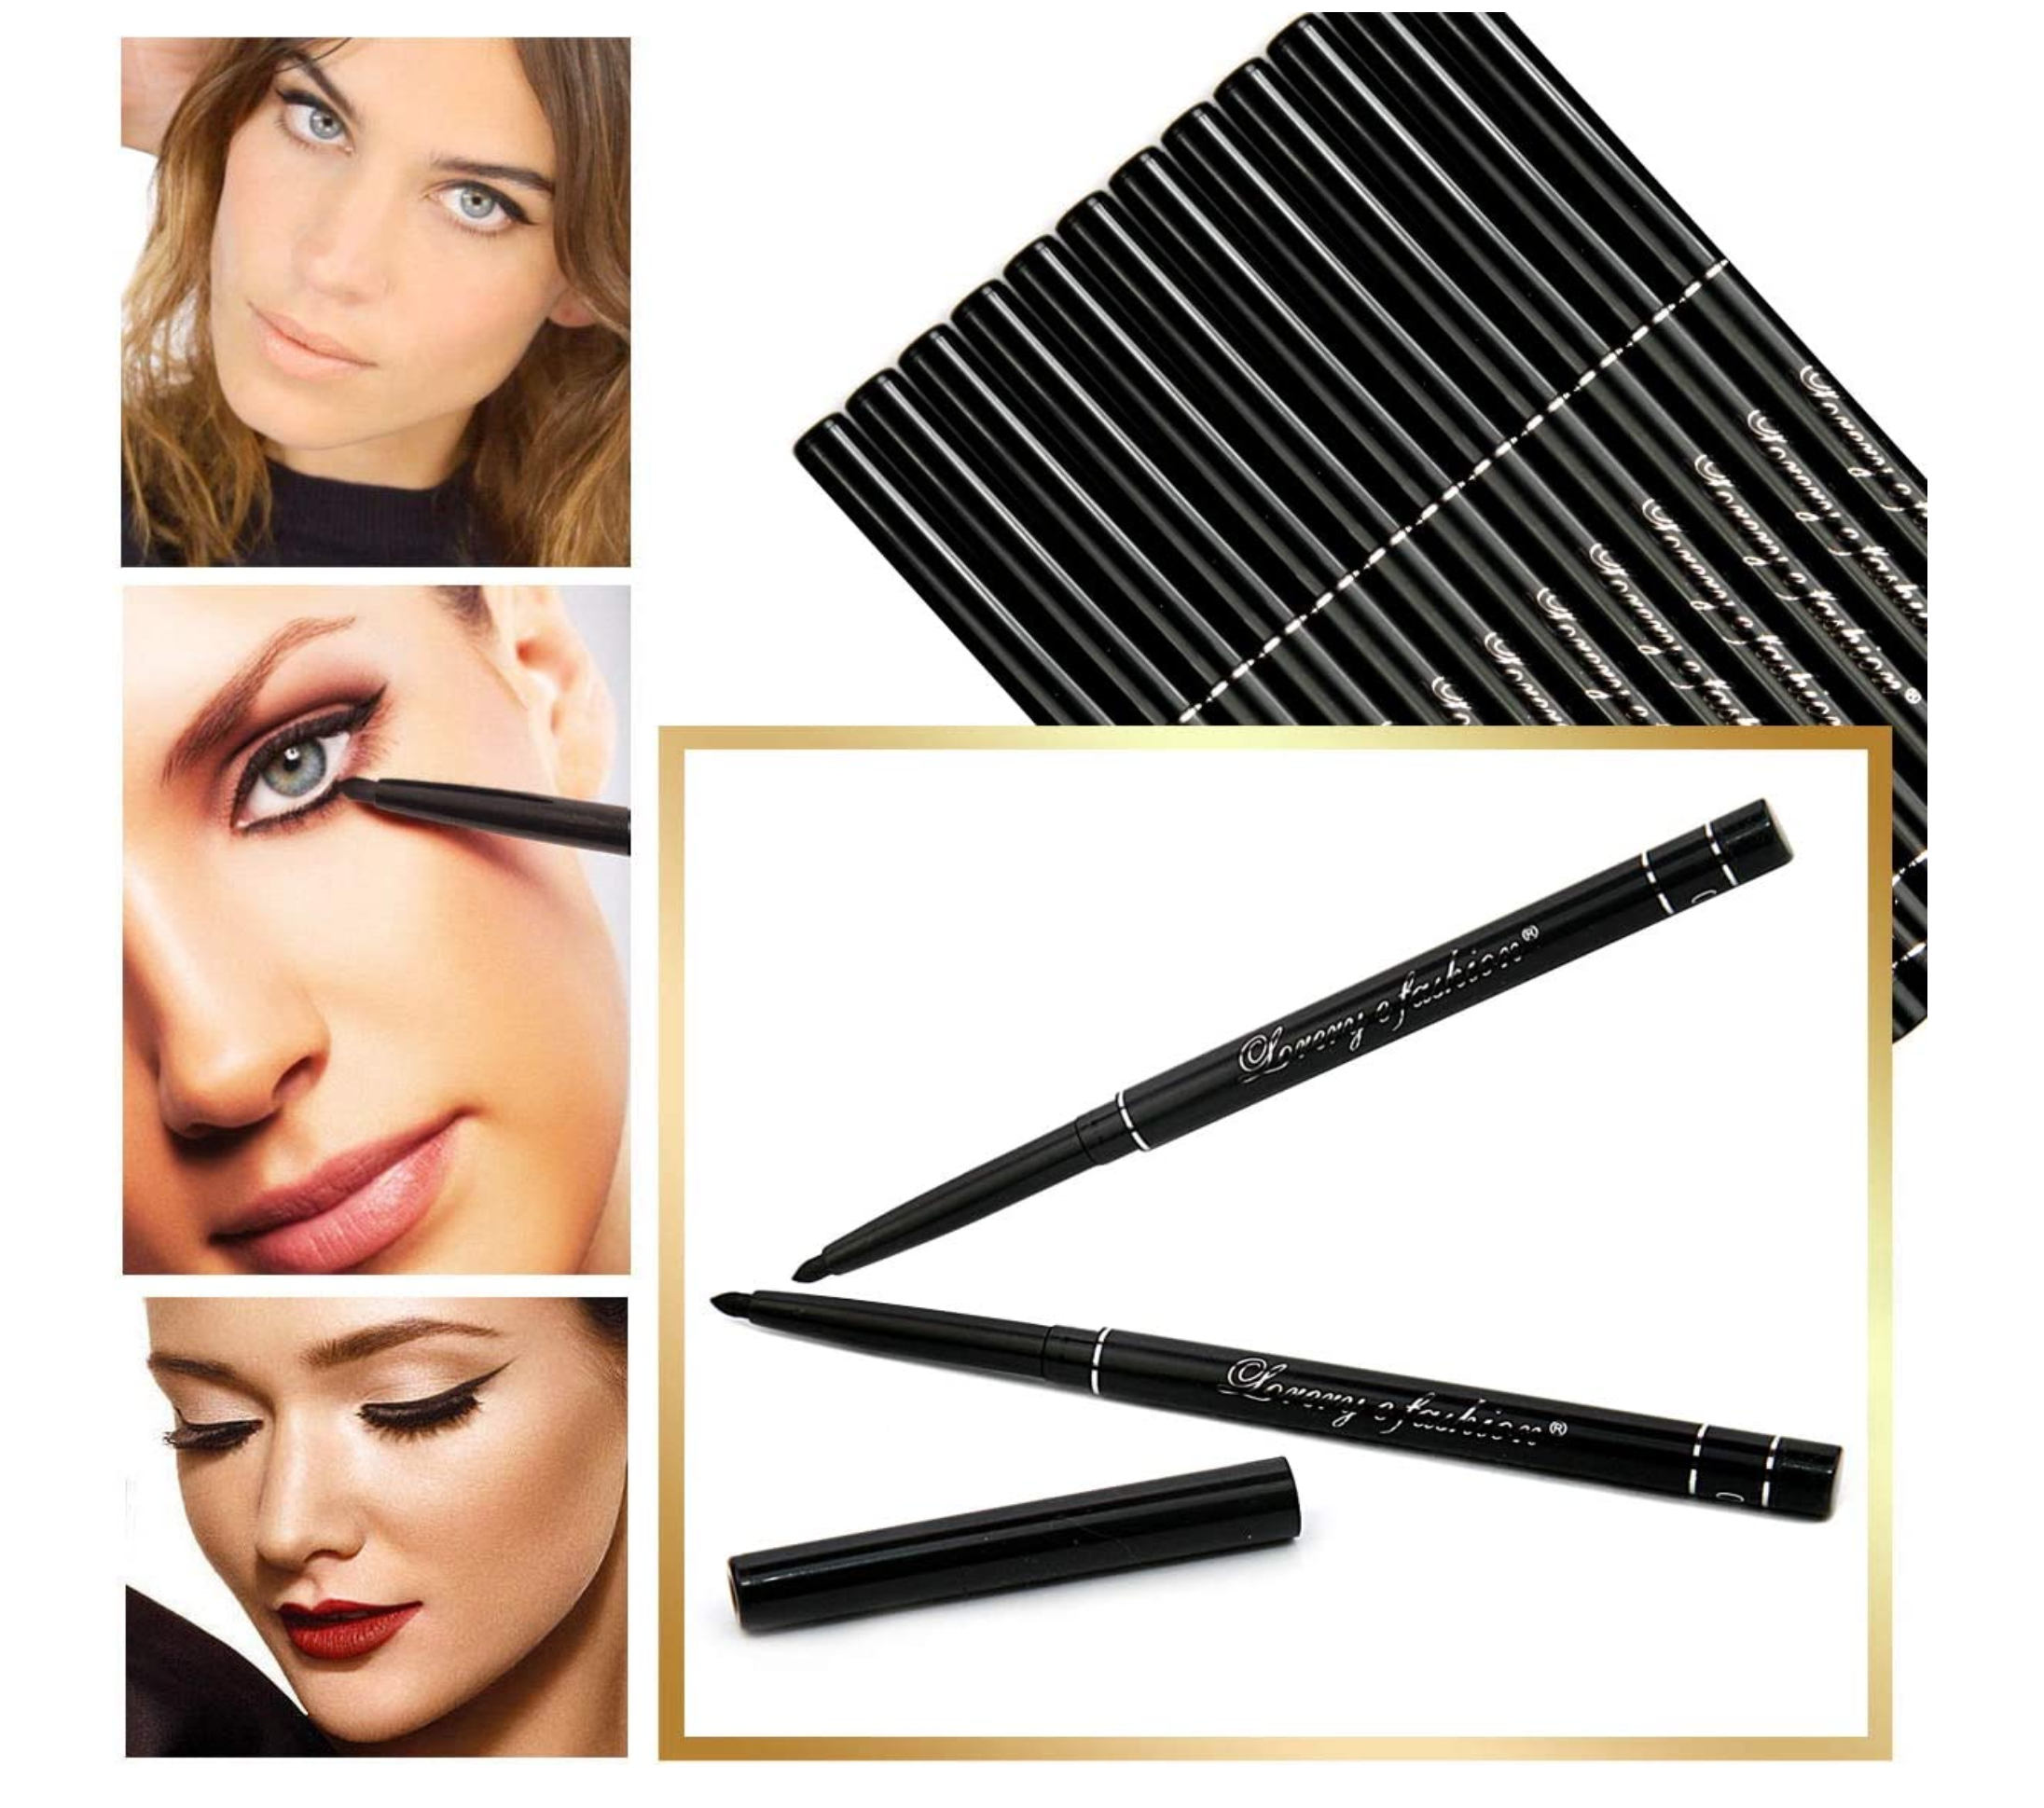 Party Prize/Gift BLACK EYELINER TWIST-UP PENS WATERPROOF For you - or as a party fun gift.